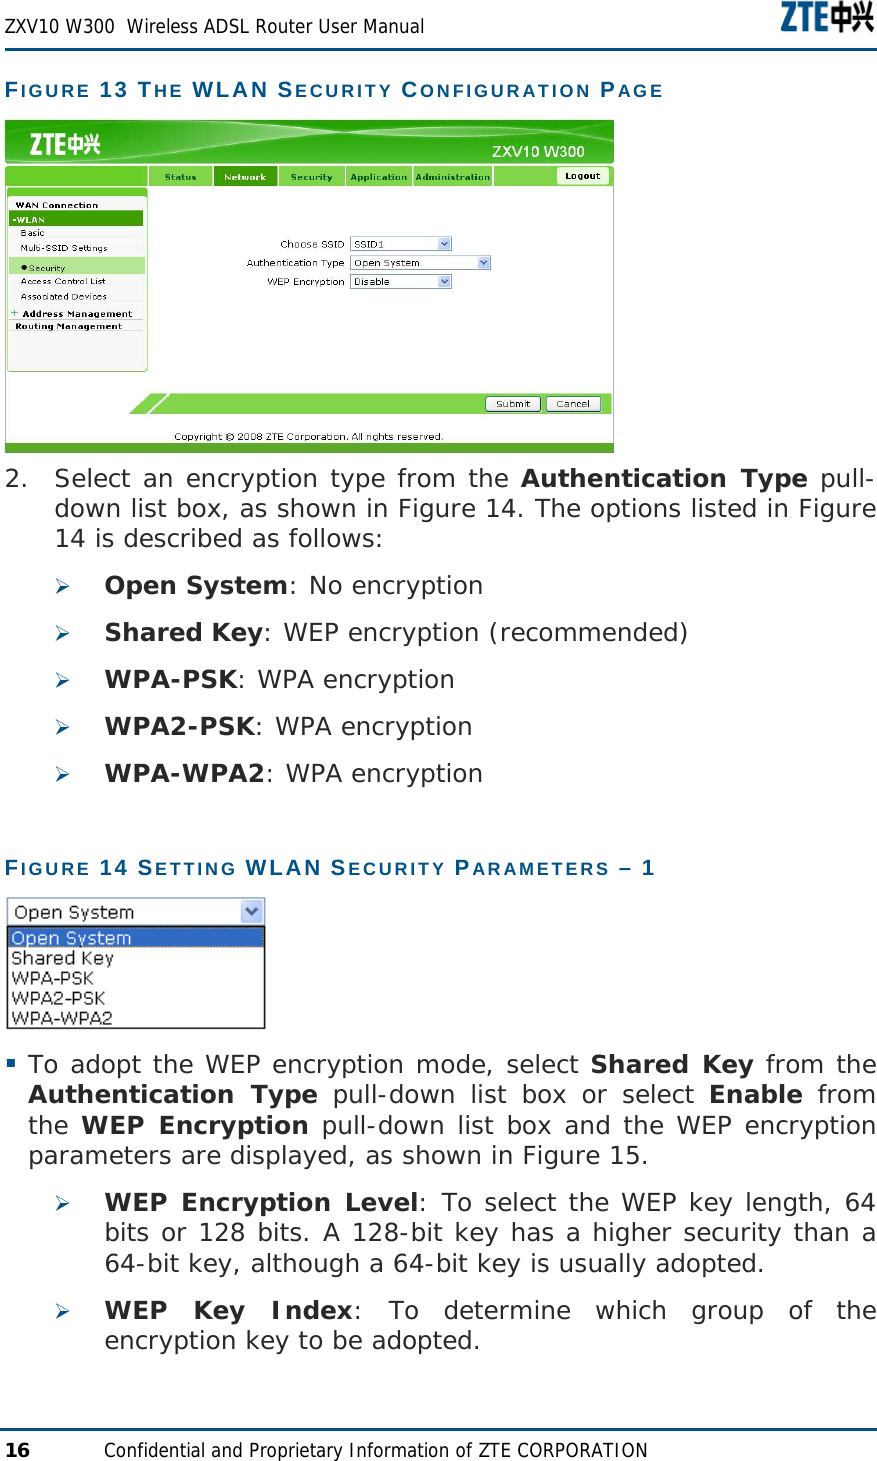  ZXV10 W300  Wireless ADSL Router User Manual  16  Confidential and Proprietary Information of ZTE CORPORATION FIGURE 13 THE WLAN SECURITY CONFIGURATION PAGE  2. Select an encryption type from the Authentication Type pull-down list box, as shown in Figure 14. The options listed in Figure 14 is described as follows: ¾ Open System: No encryption ¾ Shared Key: WEP encryption (recommended) ¾ WPA-PSK: WPA encryption ¾ WPA2-PSK: WPA encryption ¾ WPA-WPA2: WPA encryption FIGURE 14 SETTING WLAN SECURITY PARAMETERS – 1    To adopt the WEP encryption mode, select Shared Key from the Authentication Type pull-down list box or select Enable from the WEP Encryption pull-down list box and the WEP encryption parameters are displayed, as shown in Figure 15. ¾ WEP Encryption Level: To select the WEP key length, 64 bits or 128 bits. A 128-bit key has a higher security than a 64-bit key, although a 64-bit key is usually adopted. ¾ WEP Key Index: To determine which group of the encryption key to be adopted. 